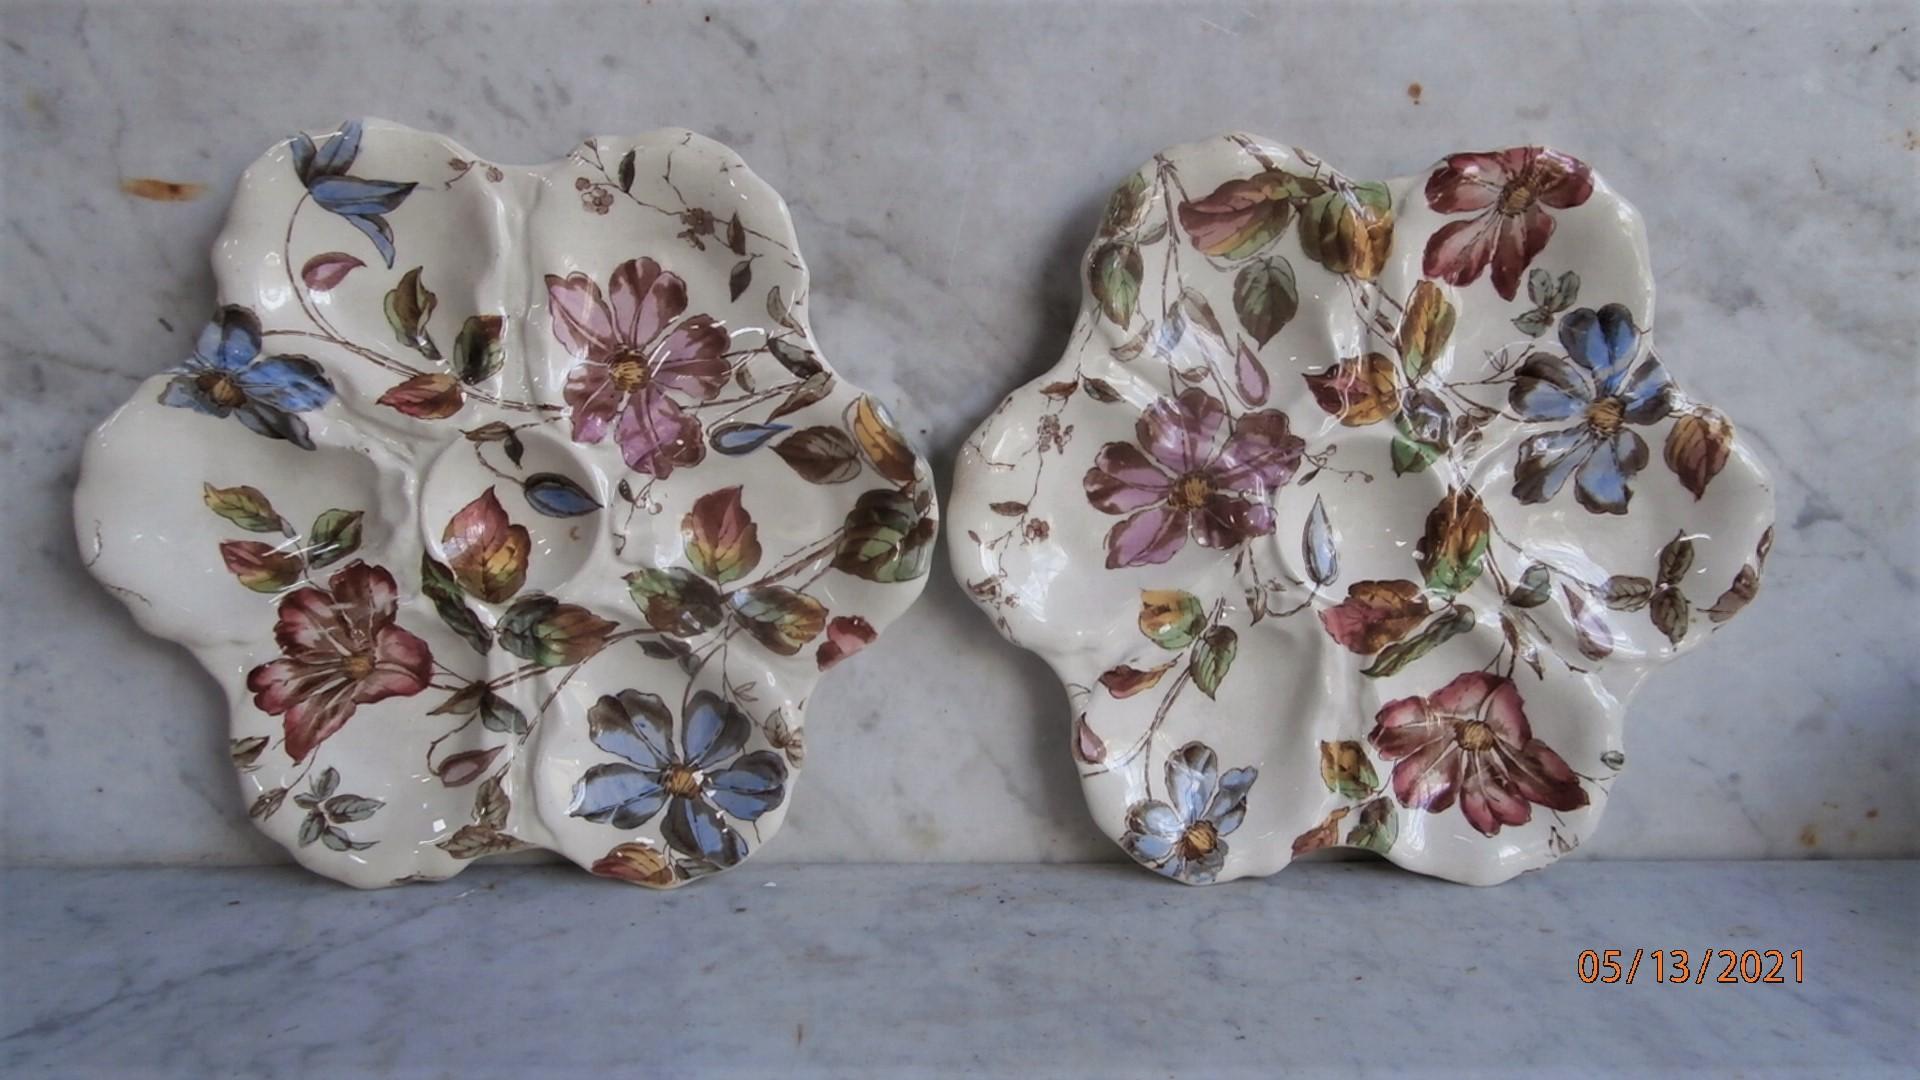 Aesthetic Movement 19th Century English Majolica Oyster Plate with Flowers Adderley